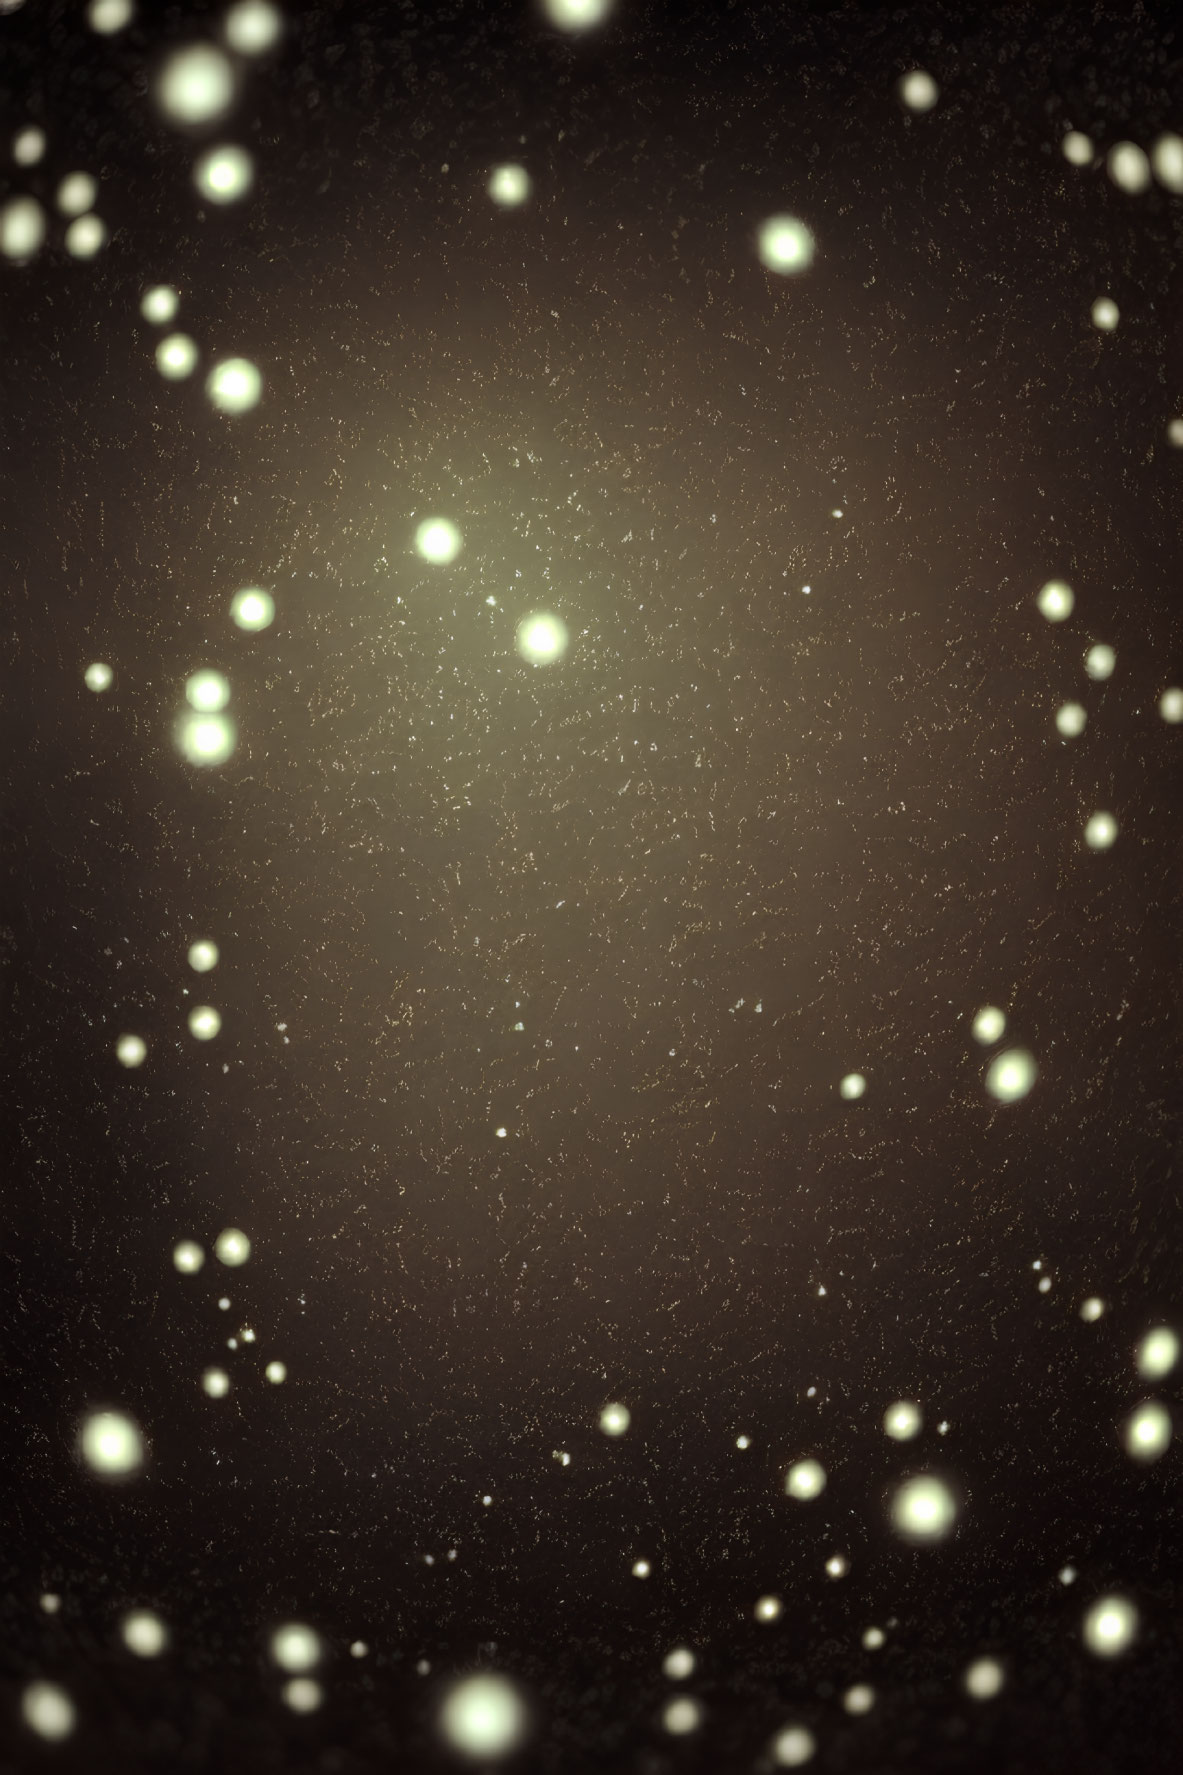 Glowing star-like particles on textured dark brown background